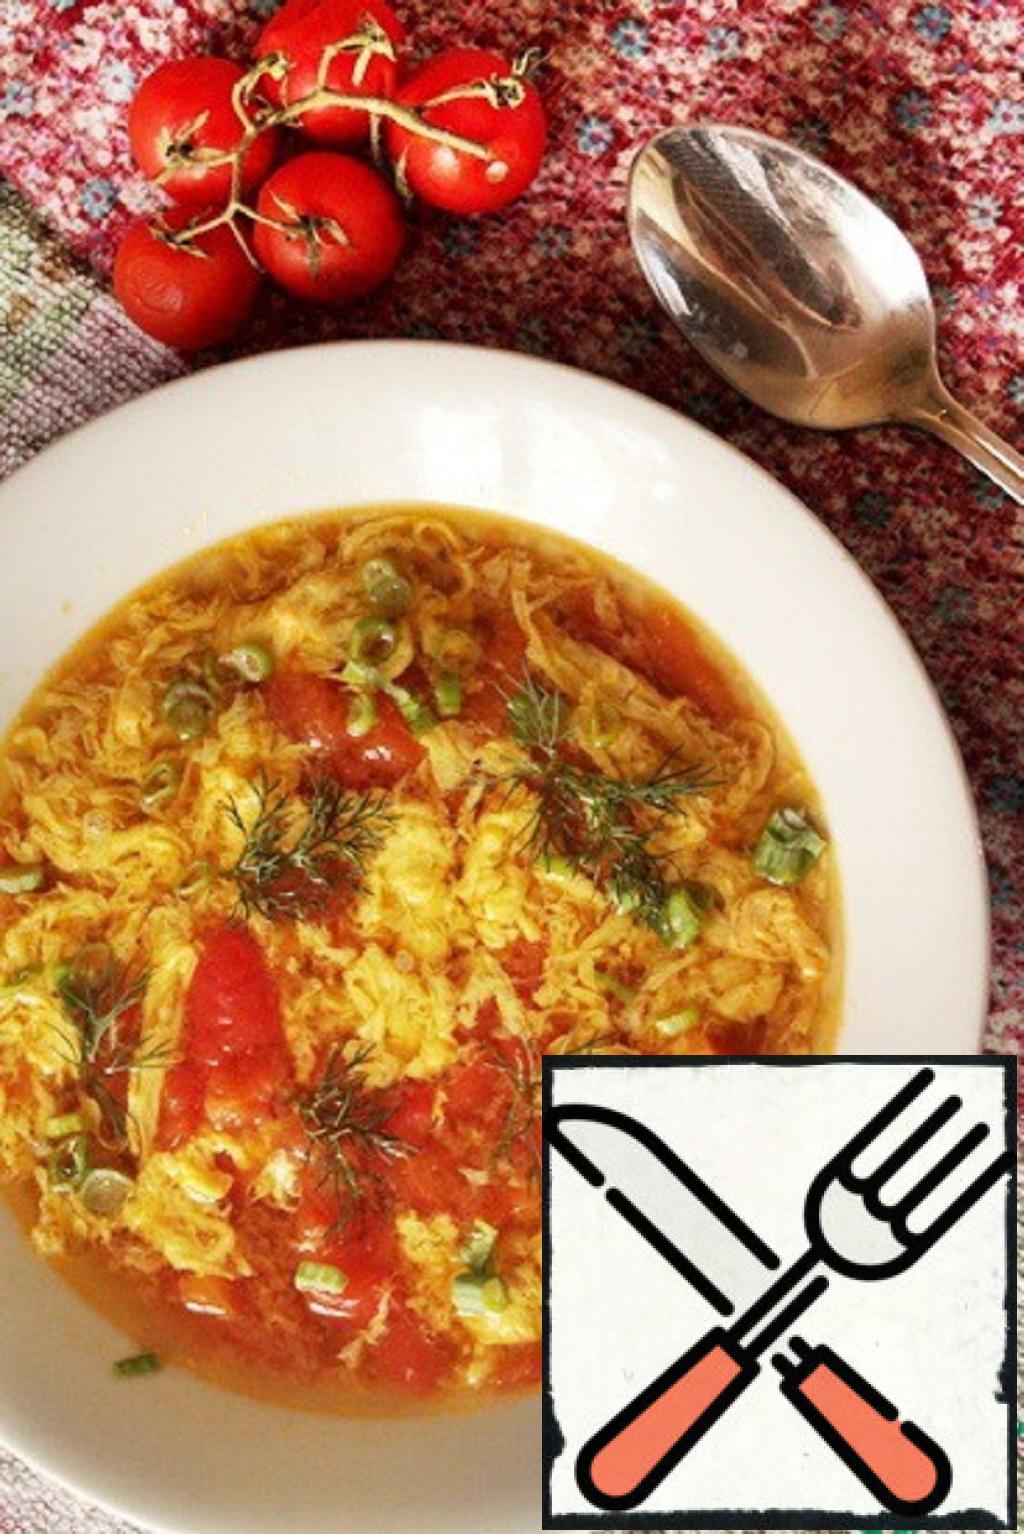 Chinese Tomato Soup Recipe 2023 with Pictures Step by Step - Food ...